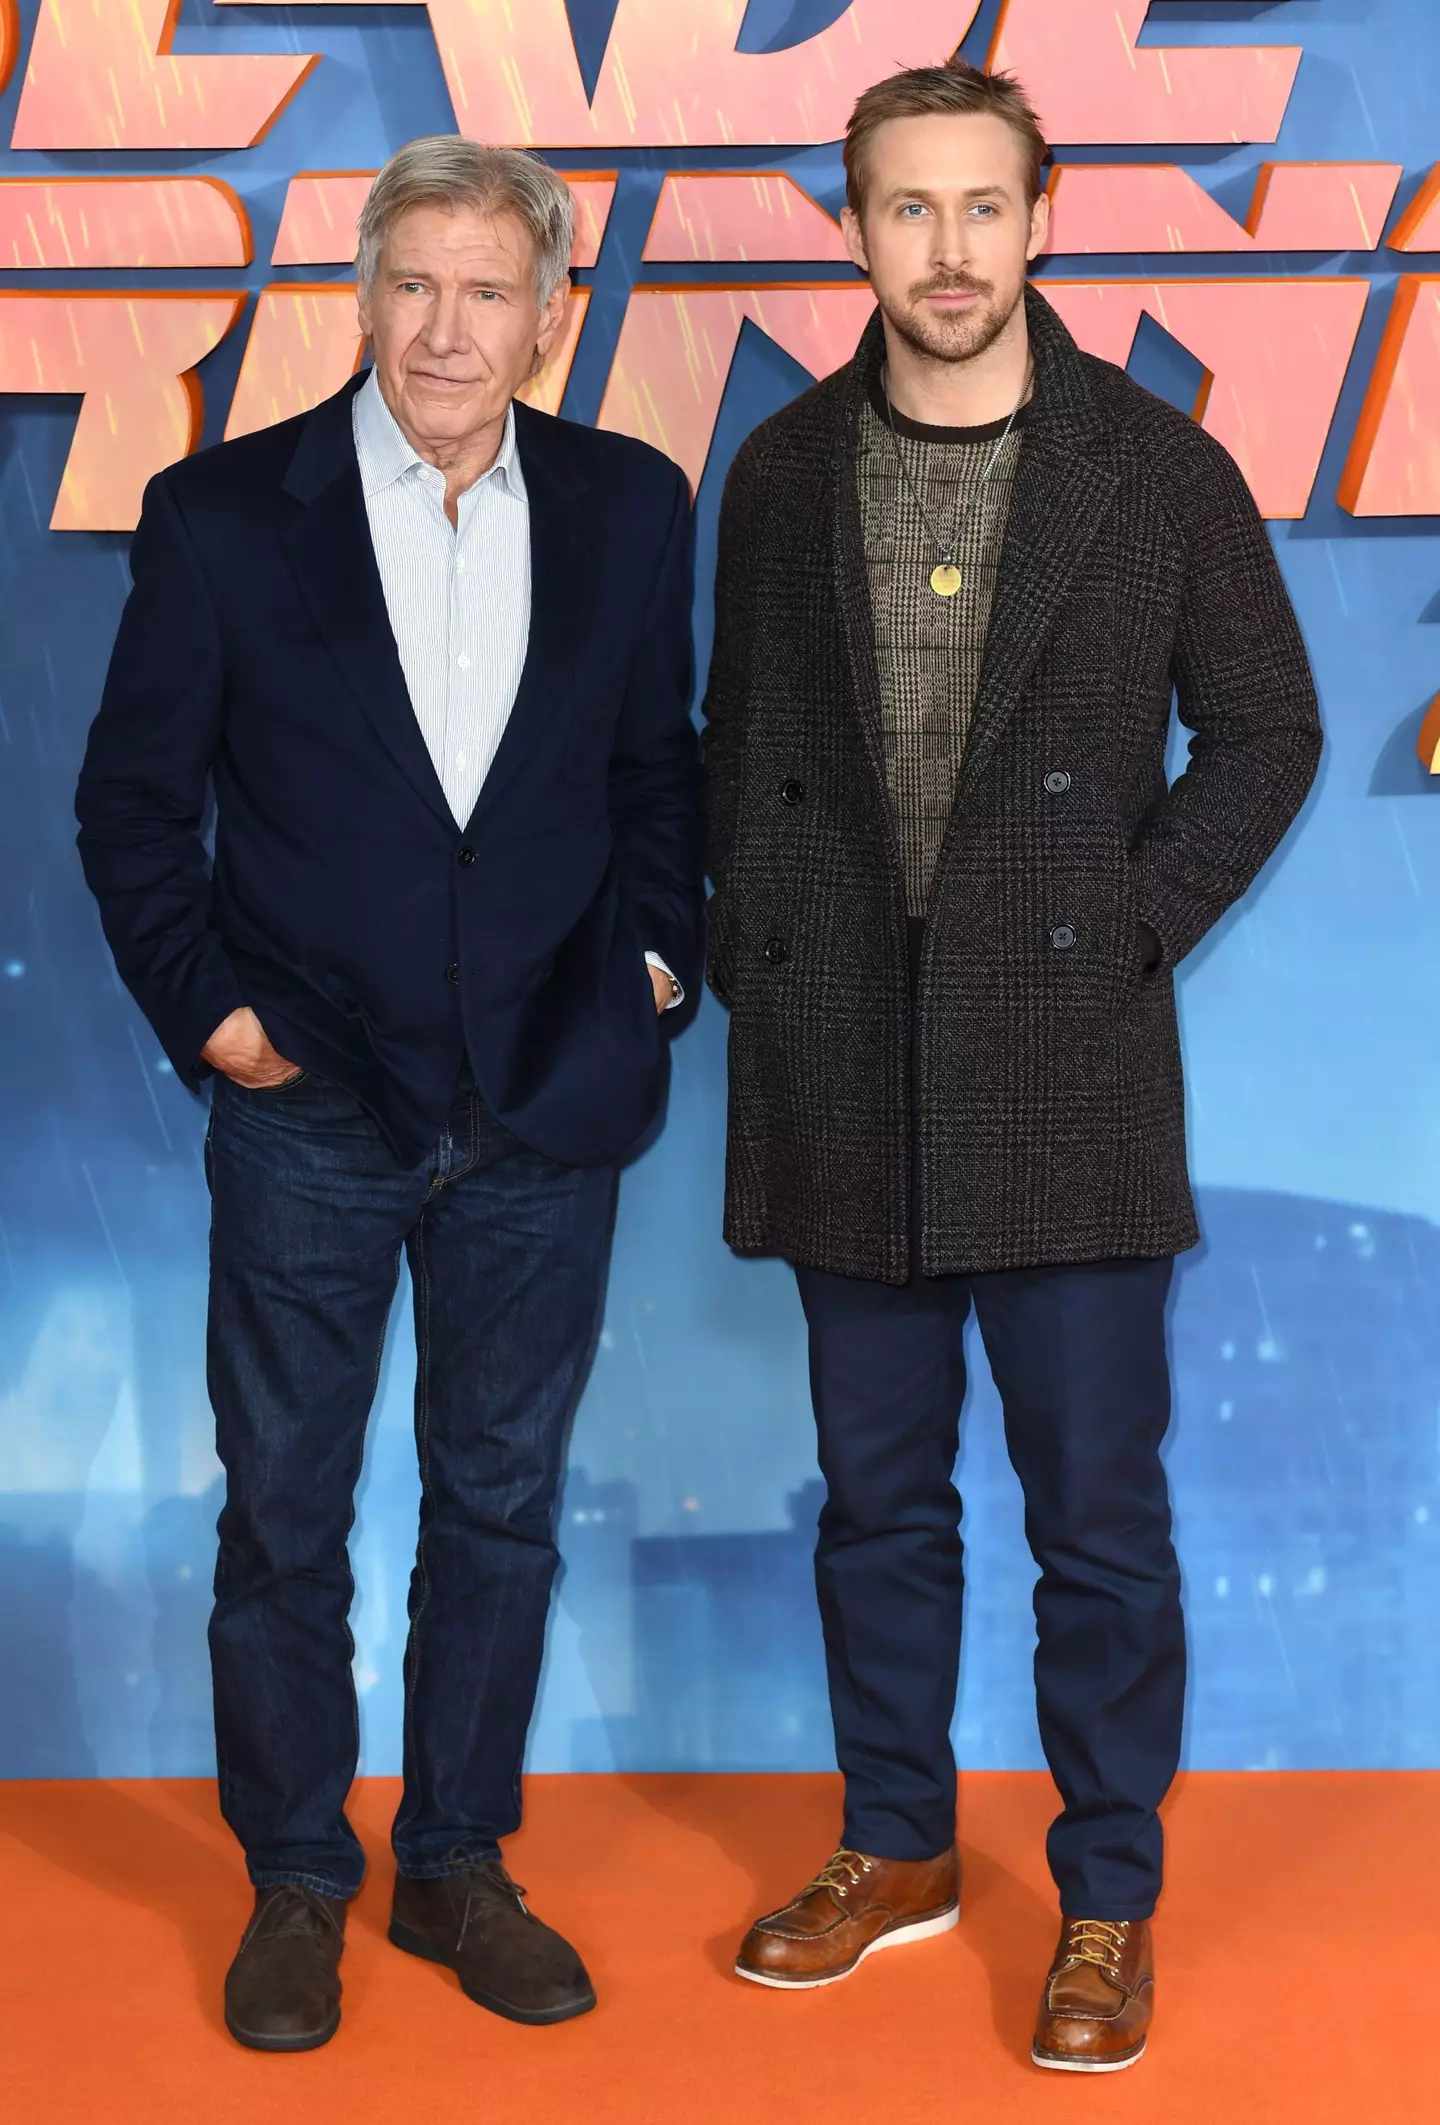 The pair starred in Blade Runner 2049 back in 2017.